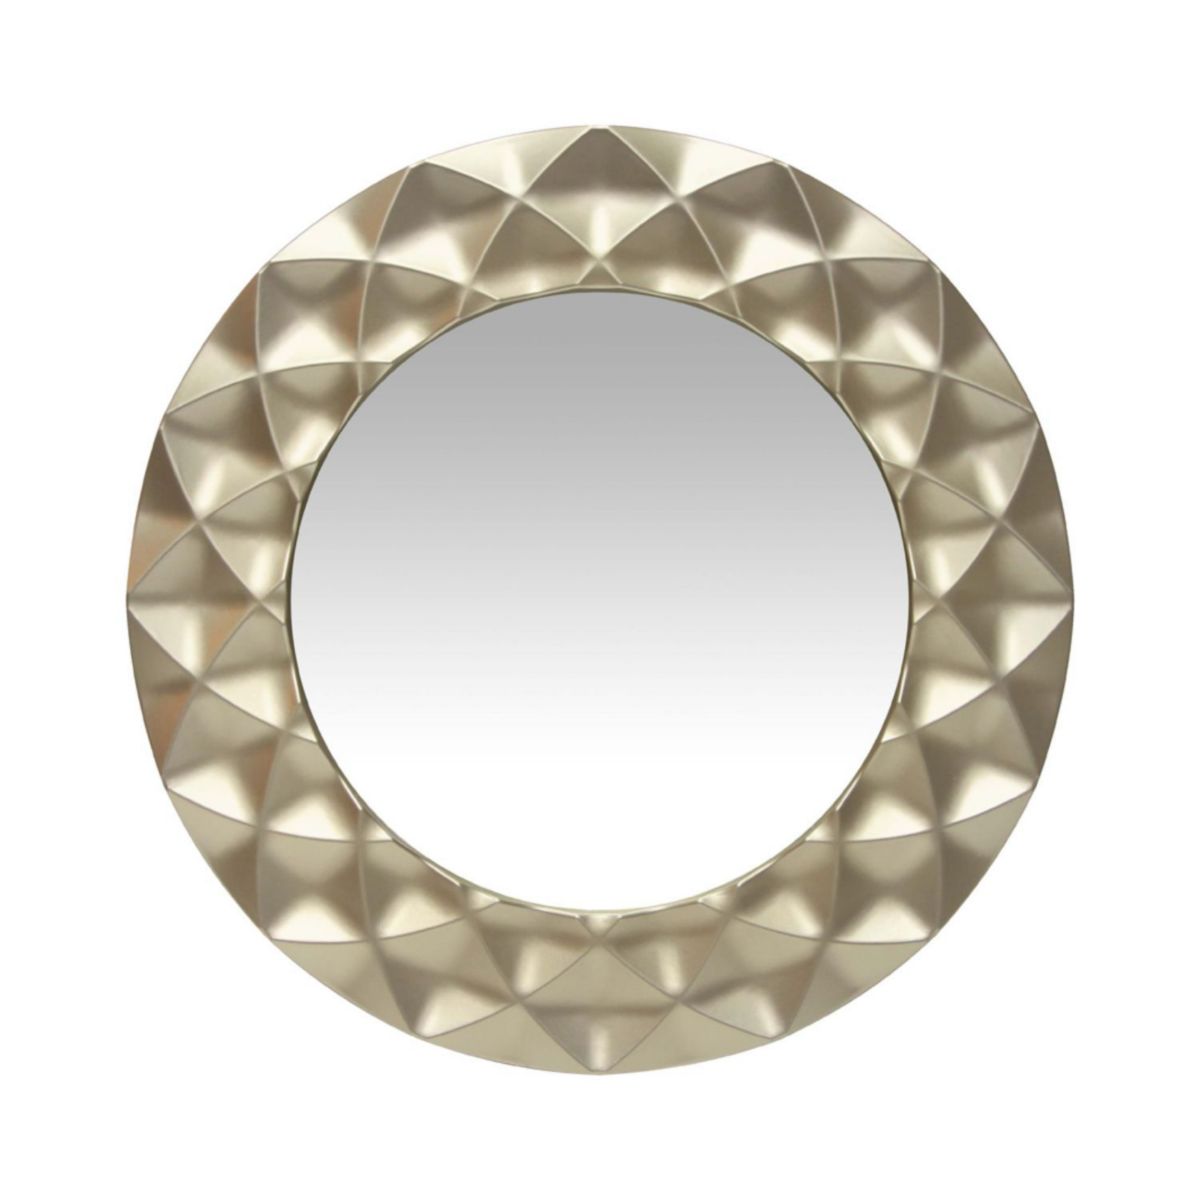 Infinity Instruments Glam Round Wall Mirror Infinity Instruments